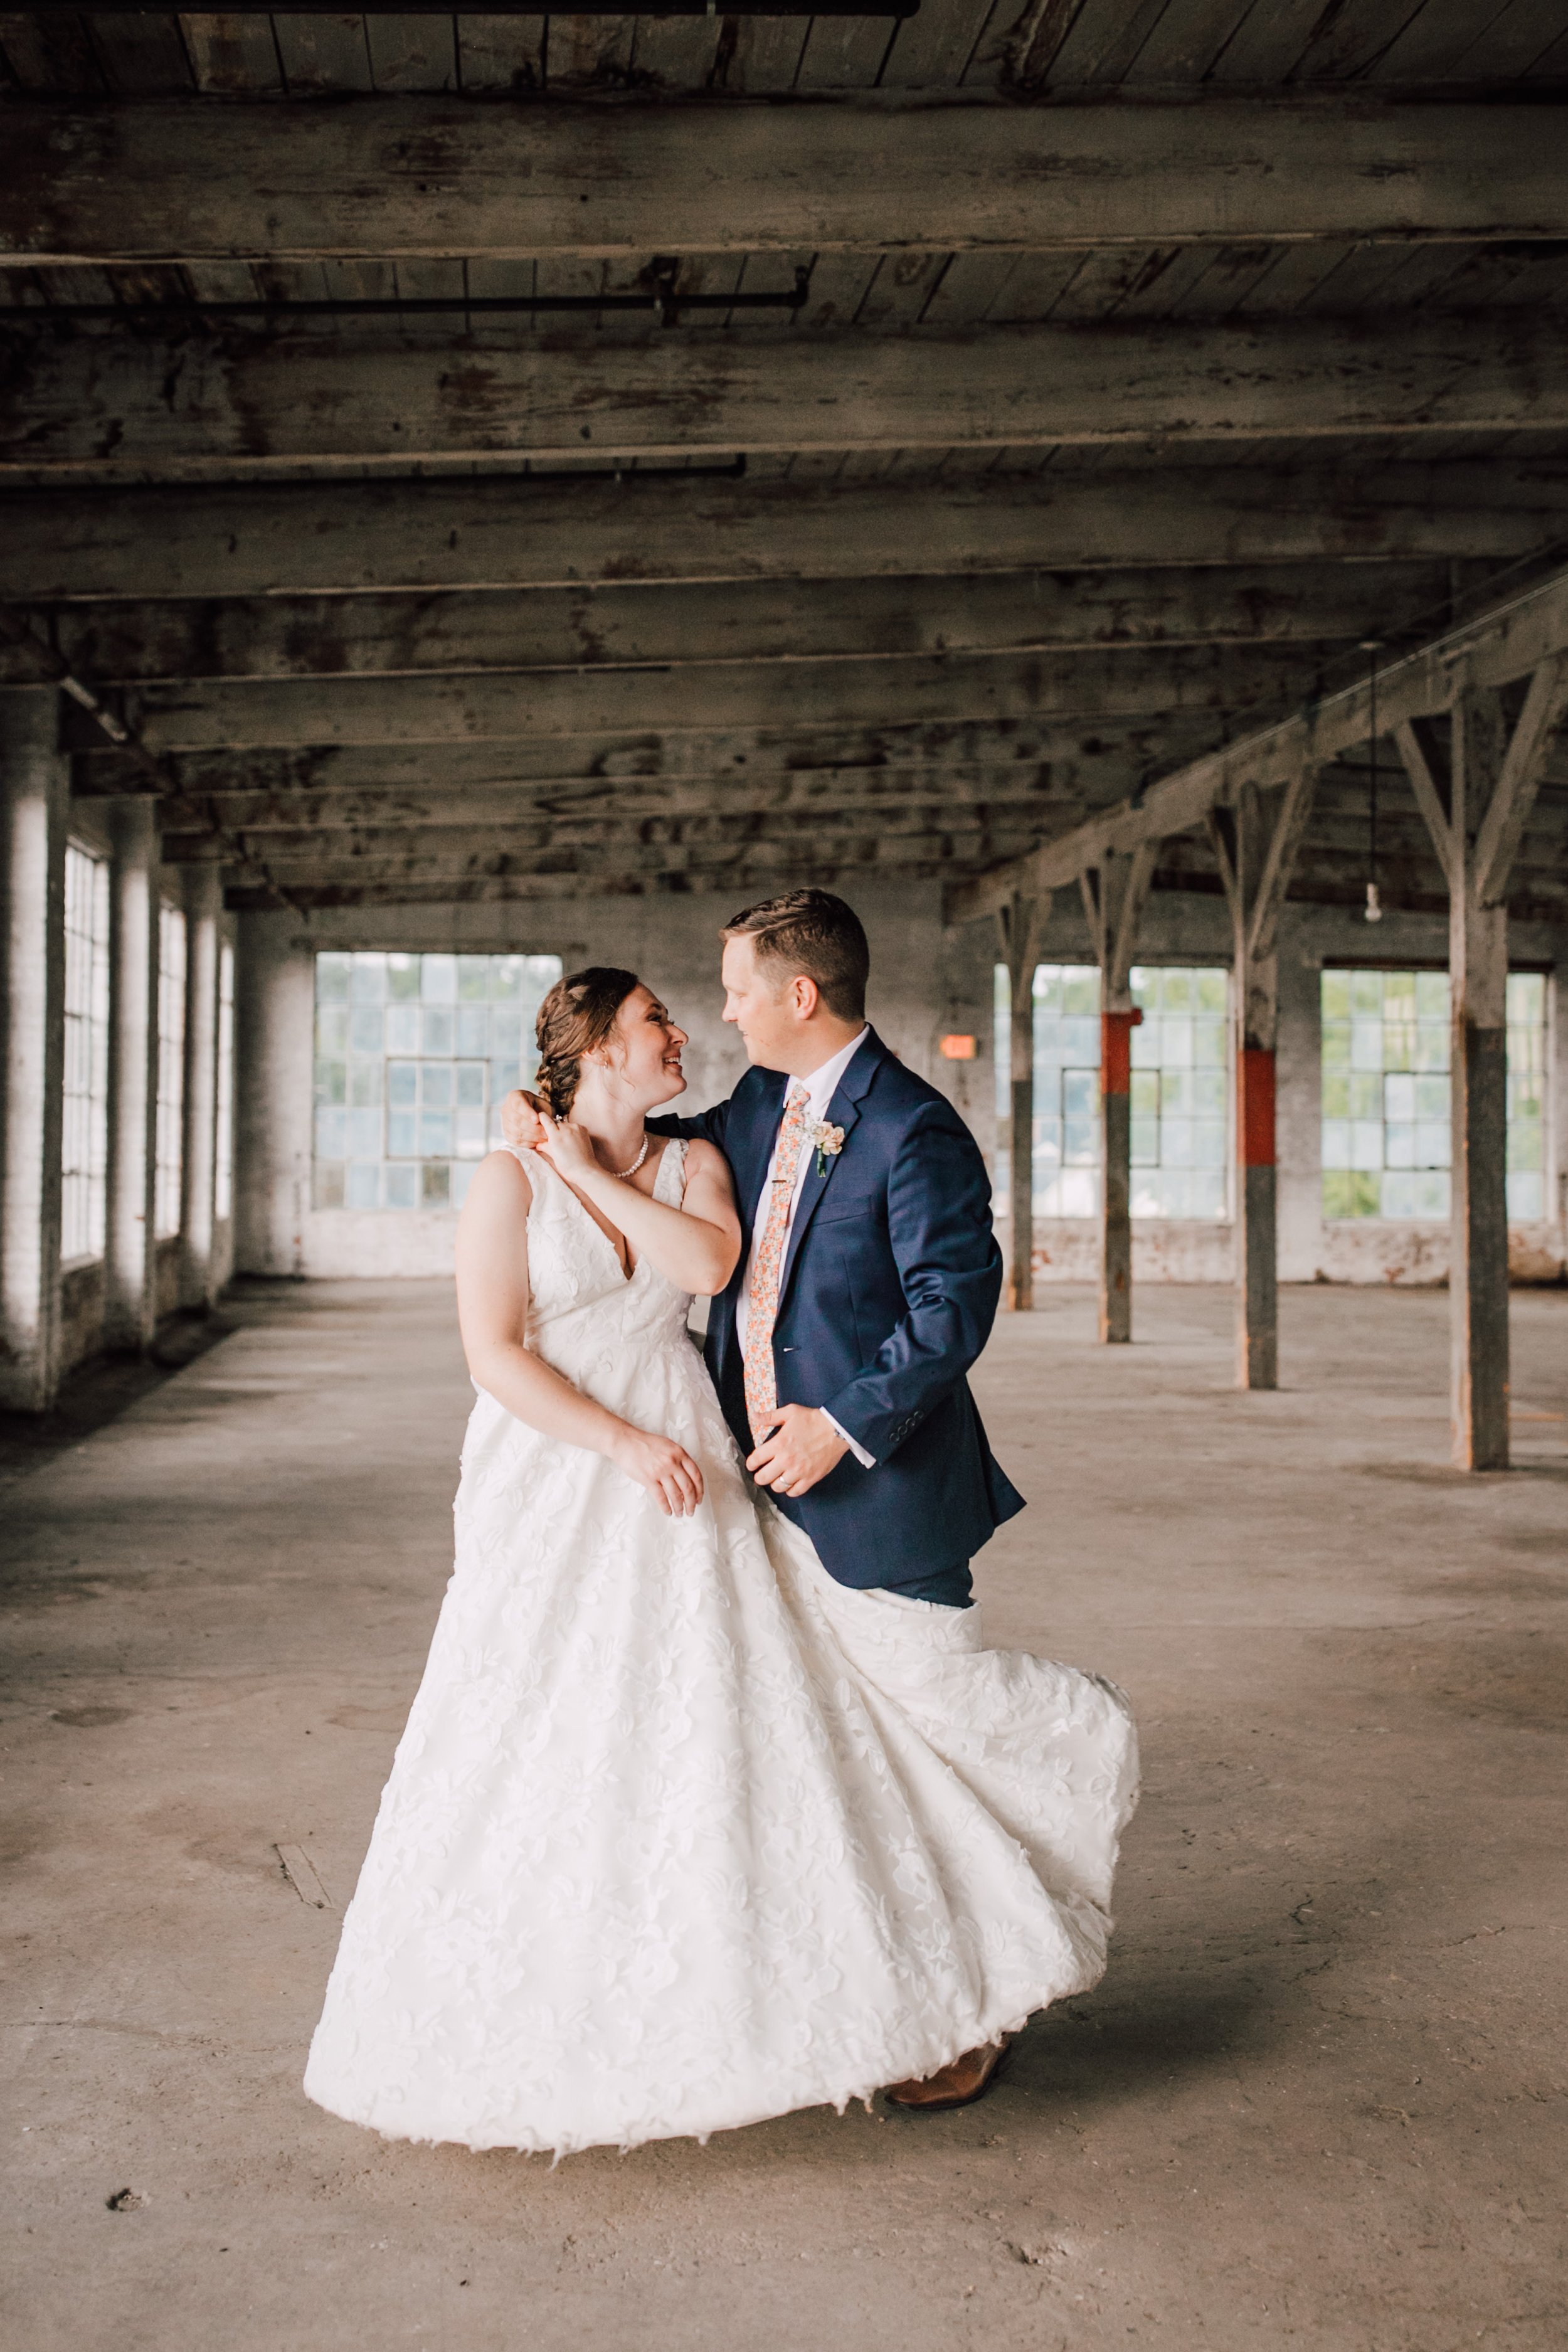  Bride and groom dance at their industrial wedding venue 